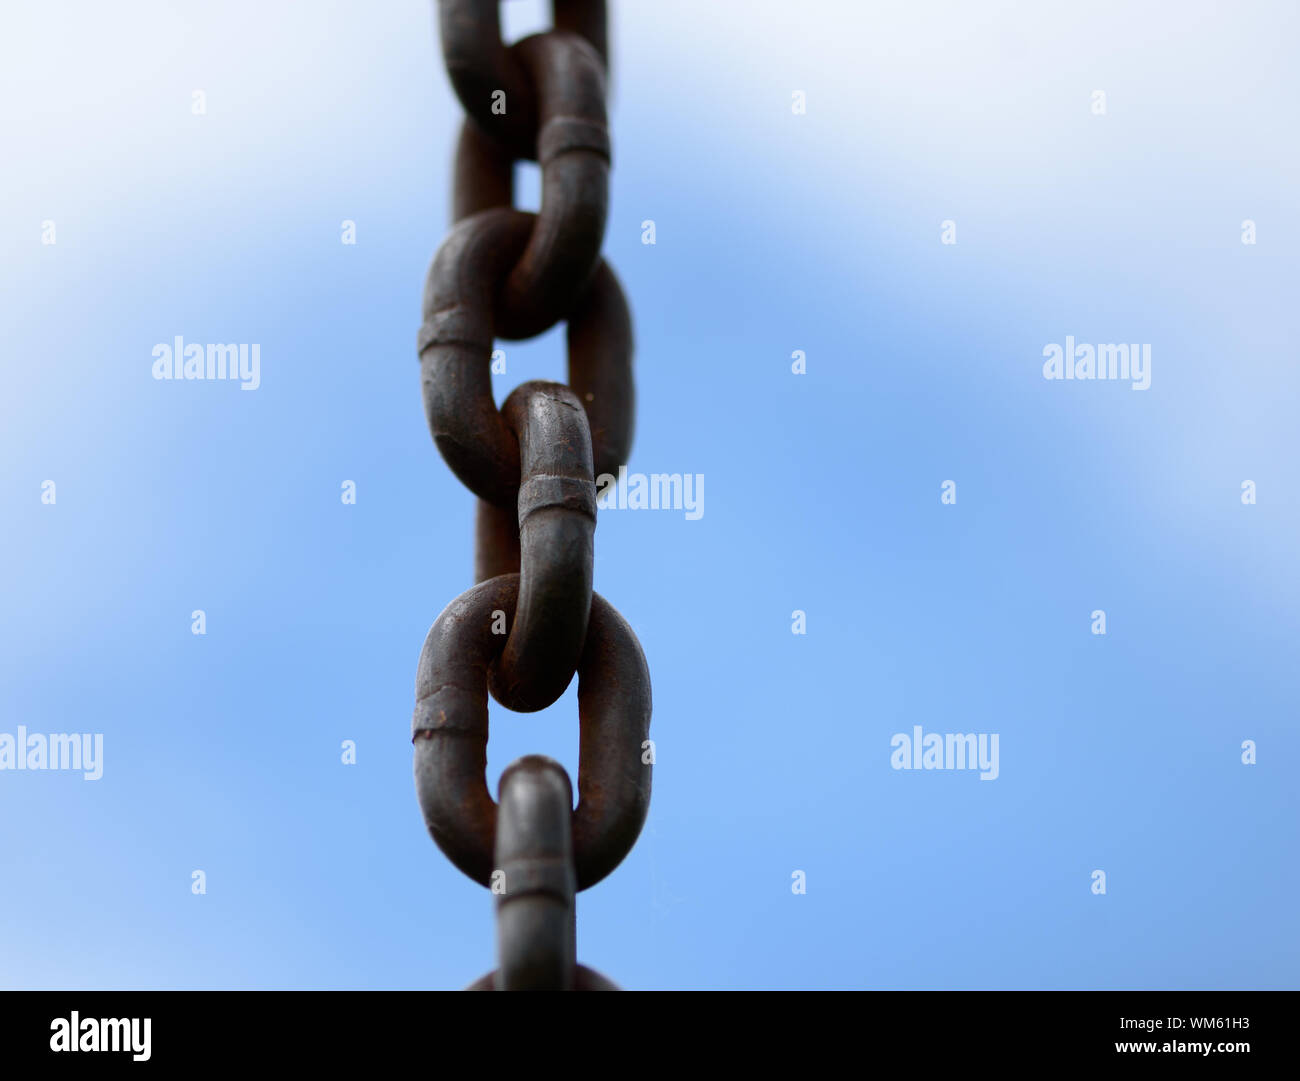 Metal chain in a closeup view with blue sky and clouds with copyspace area for freedom slavery persecution based design s and ideas Stock Photo